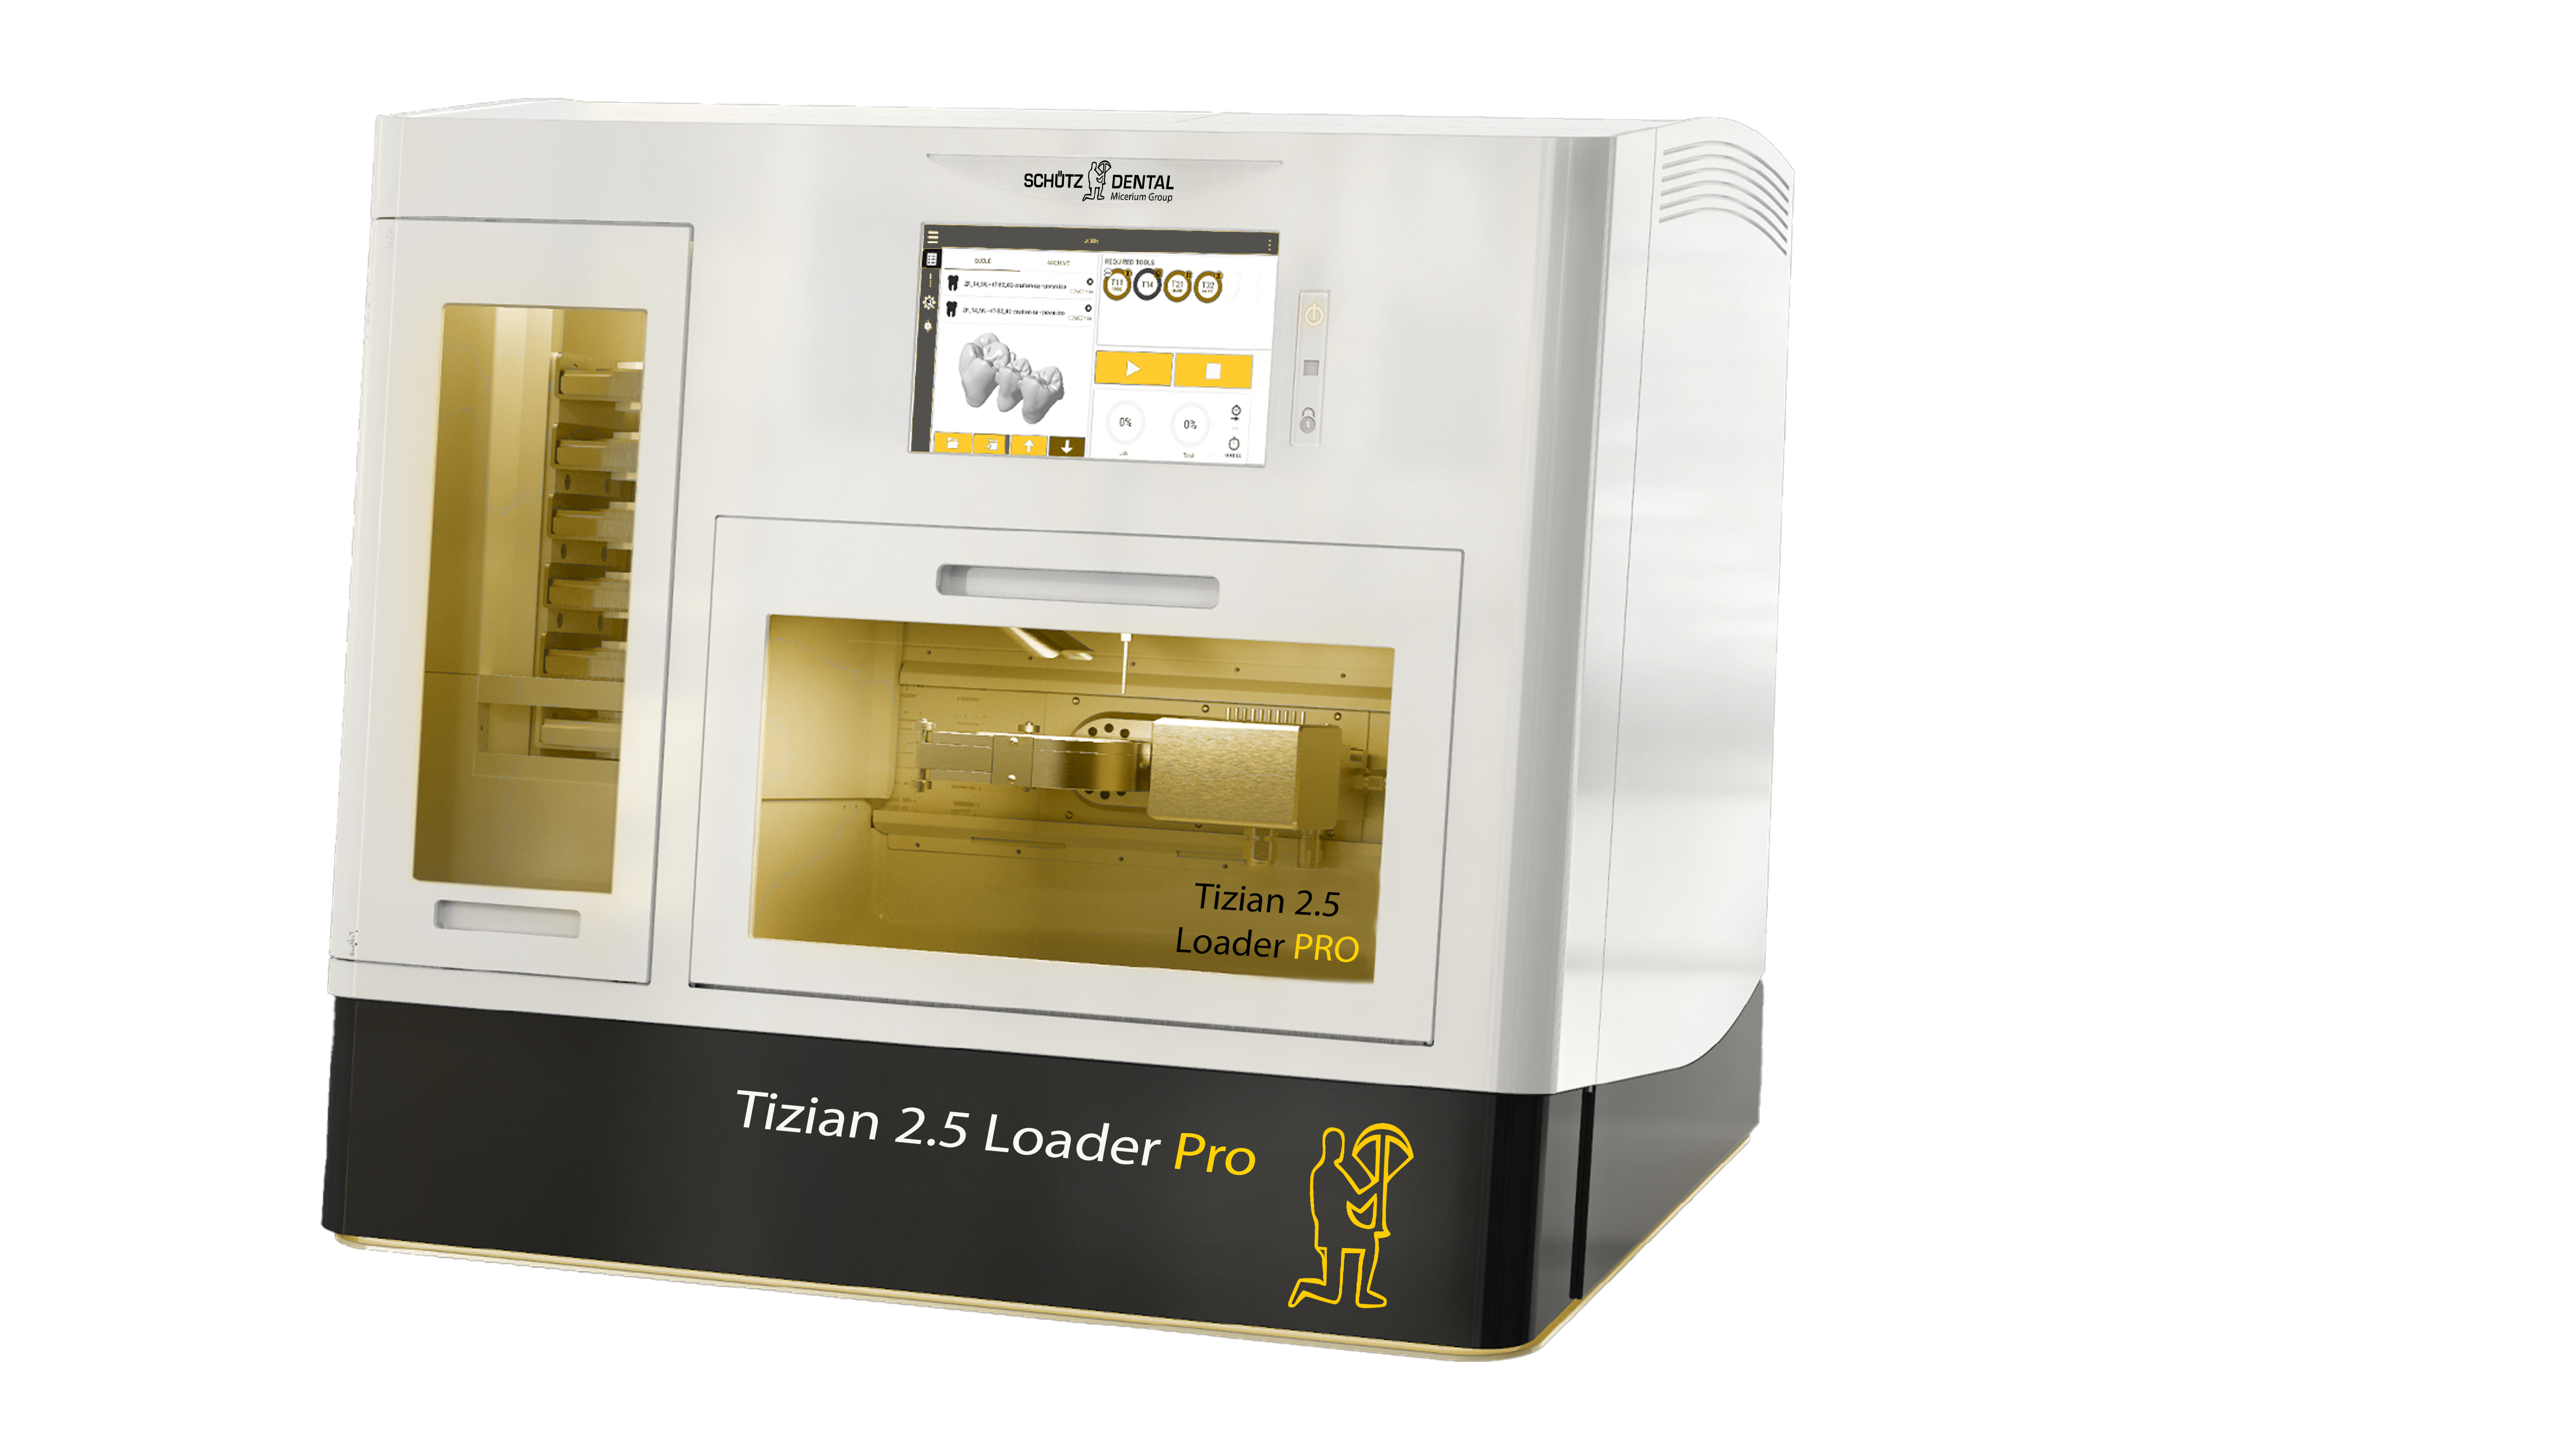 Tizian 2.5 Loader Pro milling machine, 5-axis-simultaneous processing, 3mm collet chuck